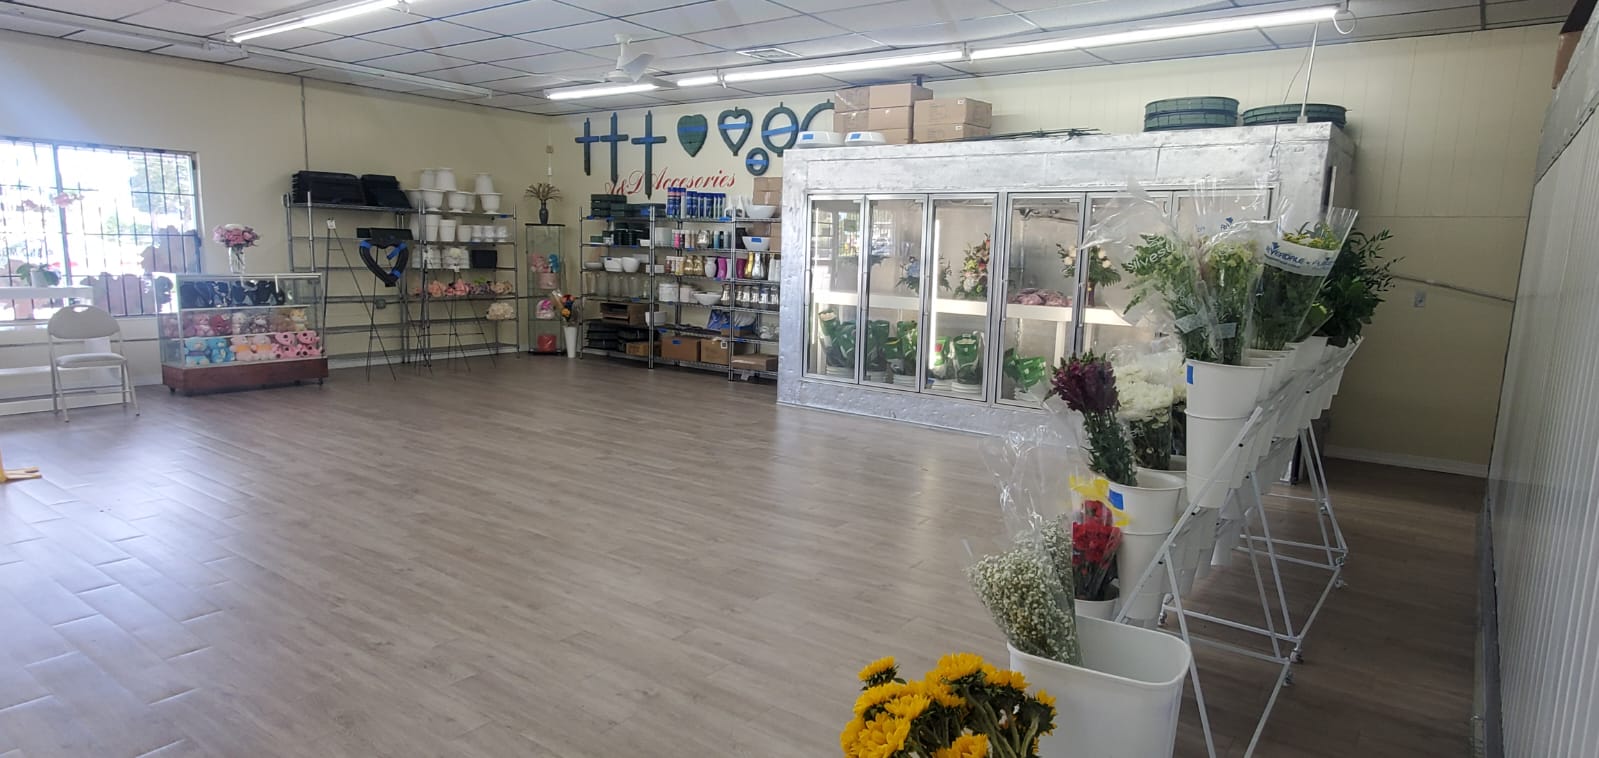 A&D FLOWERS 2911 S Congress Ave ste 107-109, Palm Springs Florida 33461